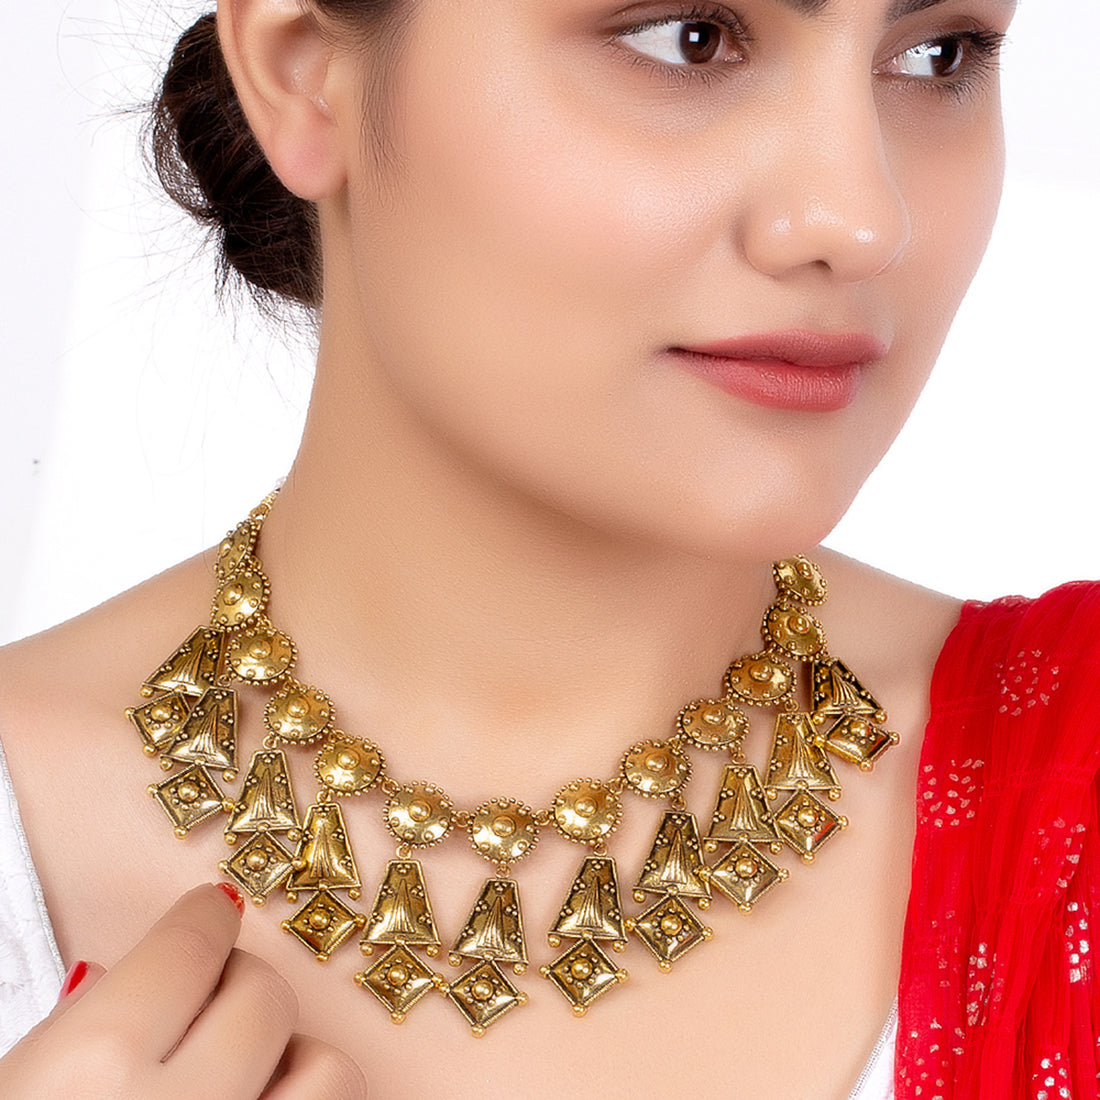 Rava Ball Oxidized Gold Plated Statement Necklace